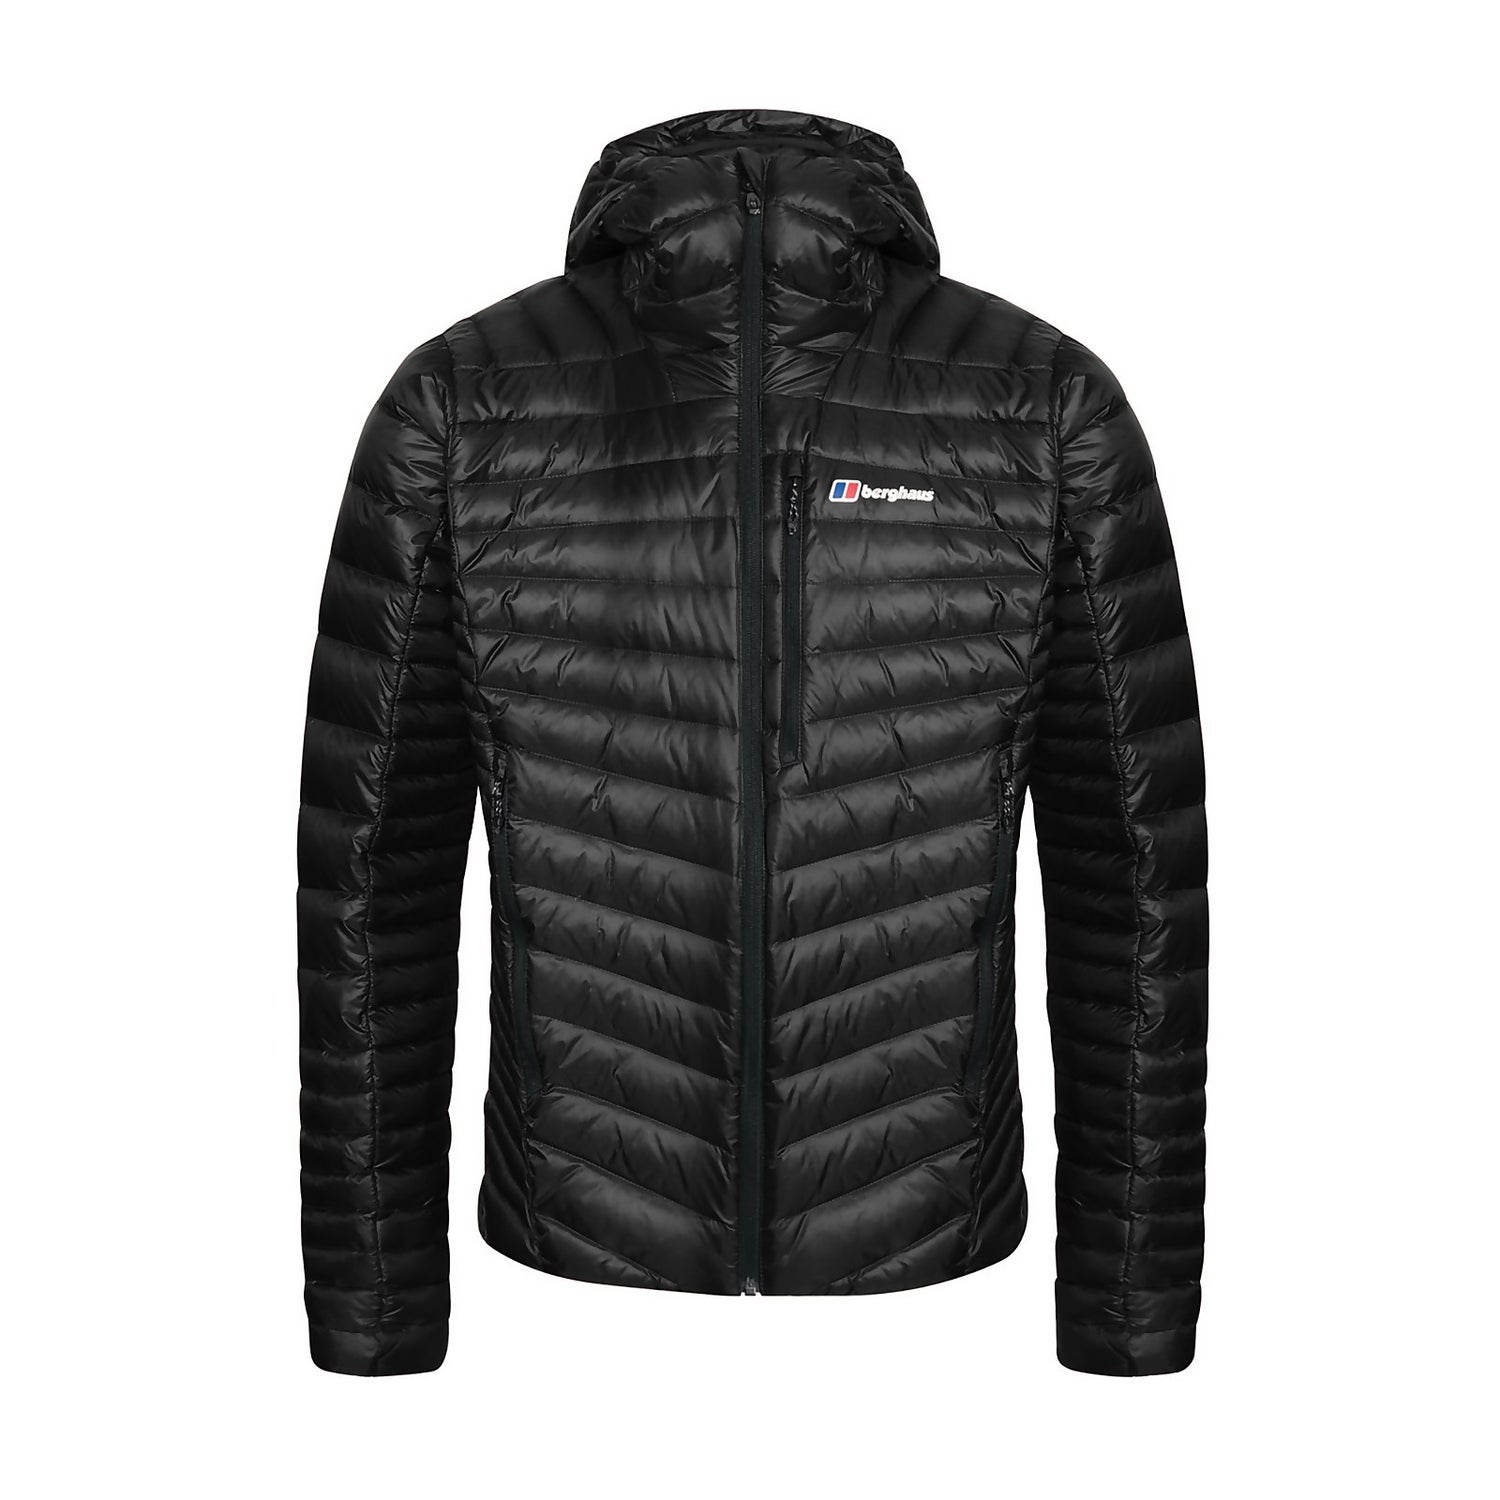 berghaus hydrodown 600 jacket,Save up to 16%,www.ilcascinone.com